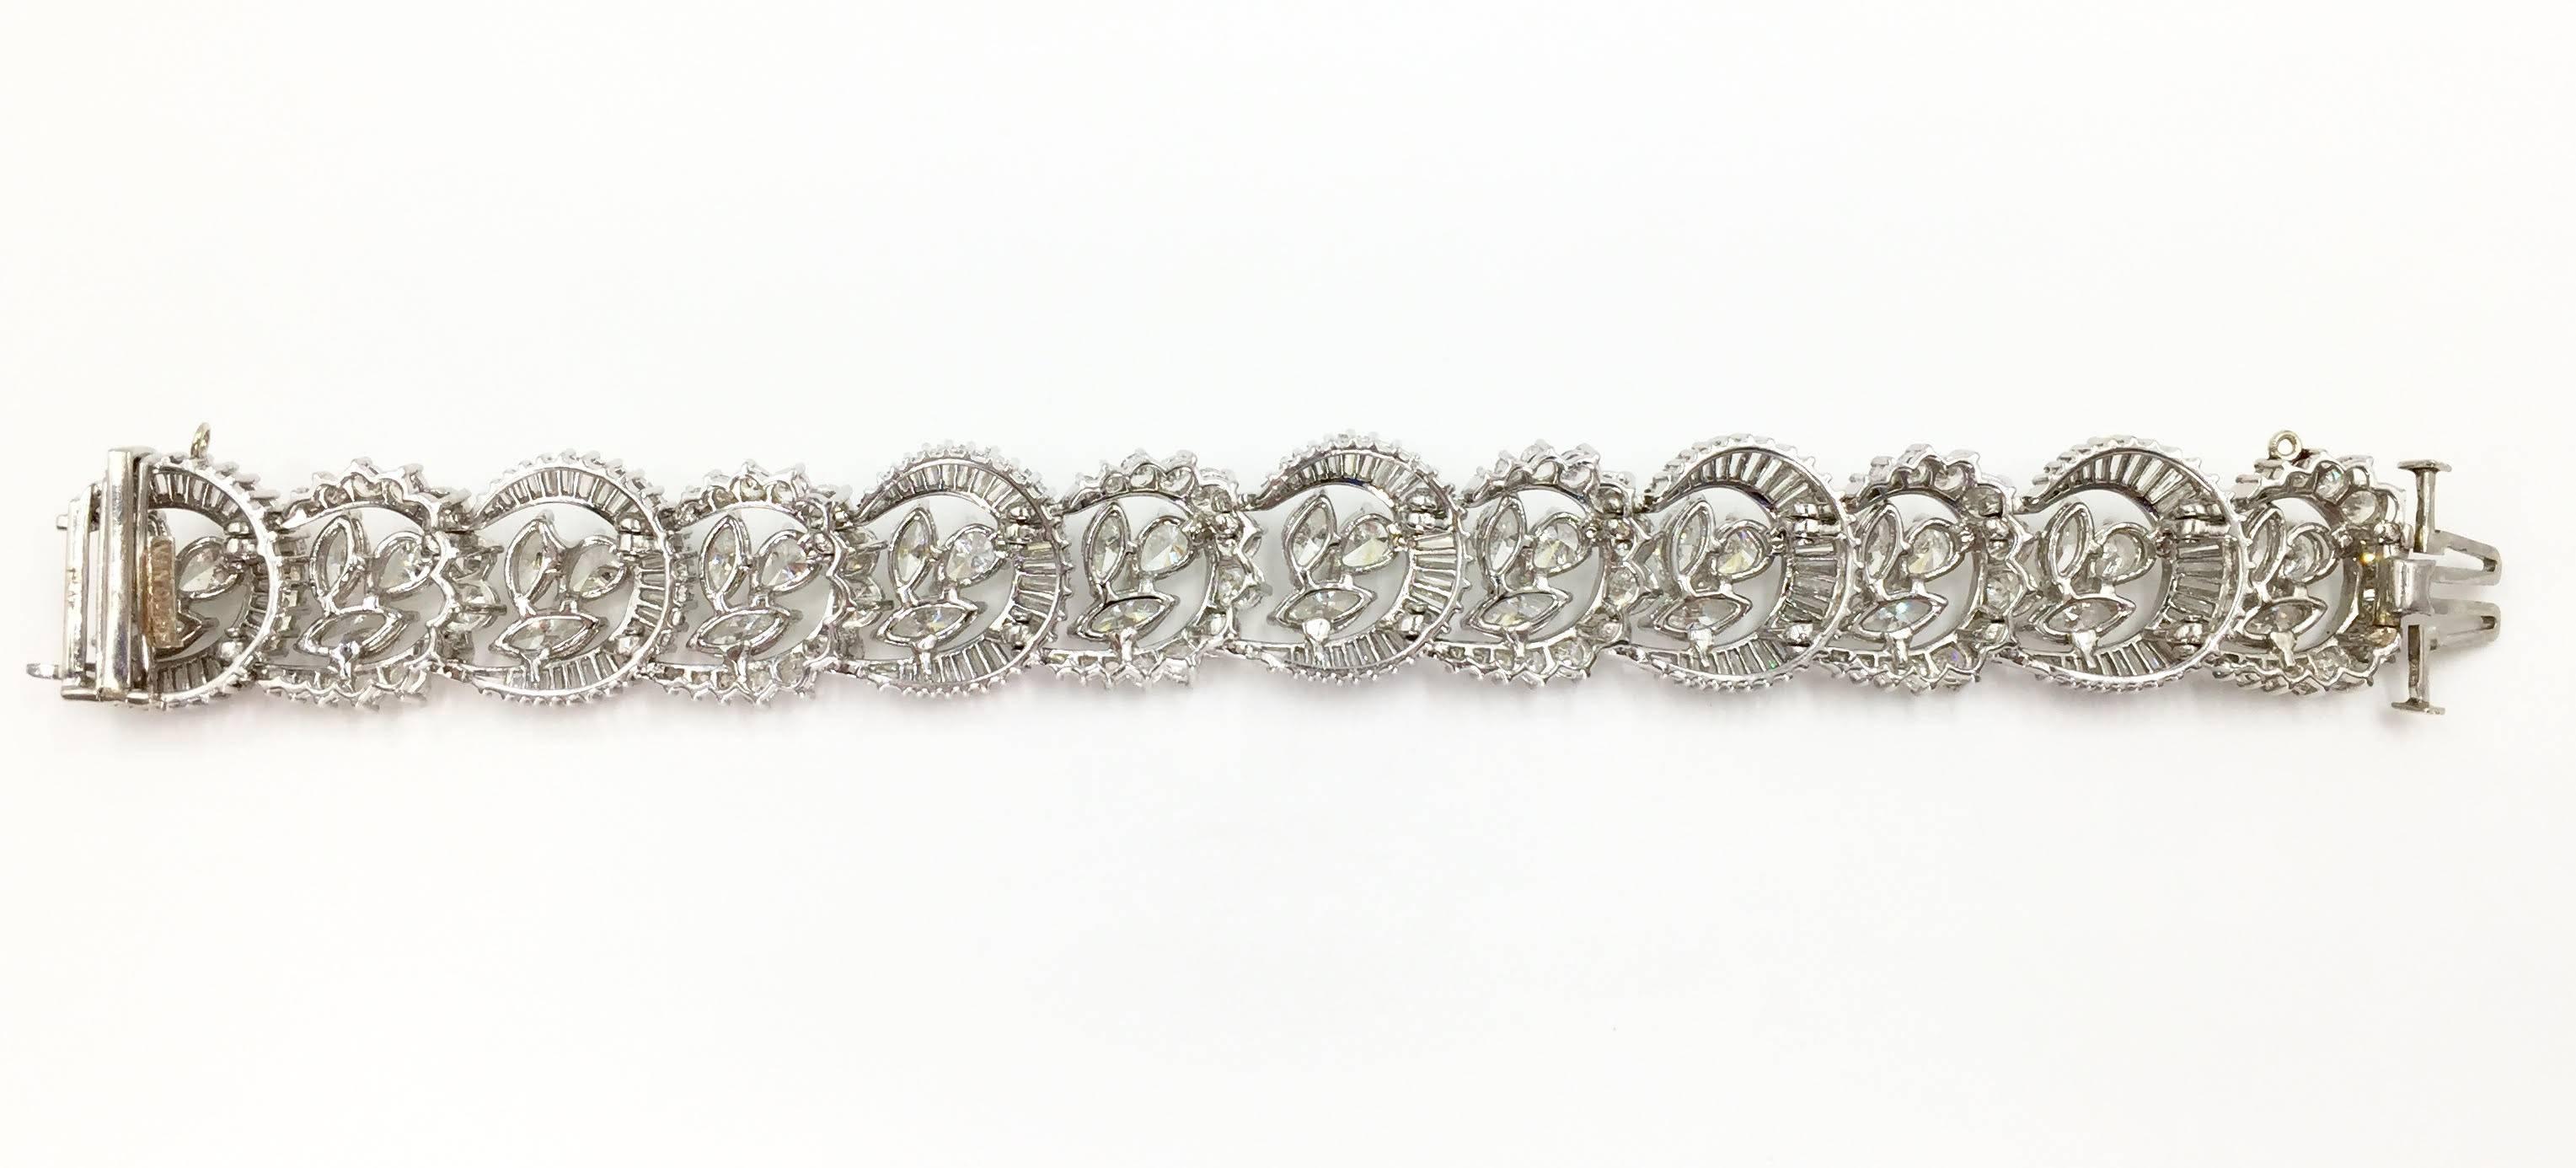 Perfect for the high-fashion antique jewelry lover. This beautifully designed, signed Van Clief, platinum bracelet with crescent shaped links of alternating rows of round brilliant and baguette diamonds give this bracelet a unique design with lots